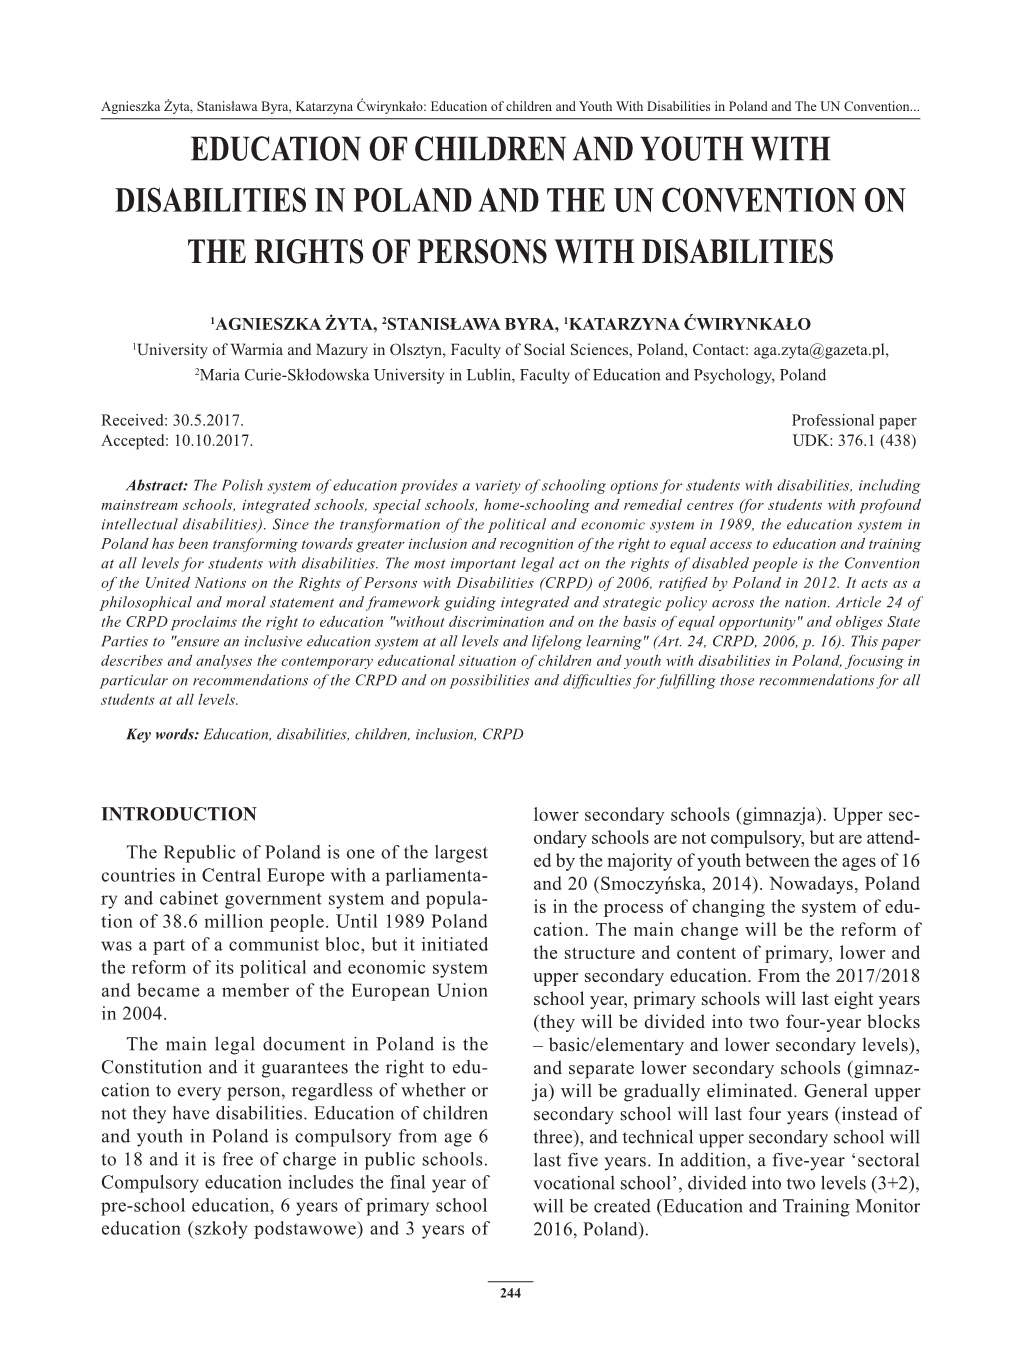 Education of Children and Youth with Disabilities in Poland and UN